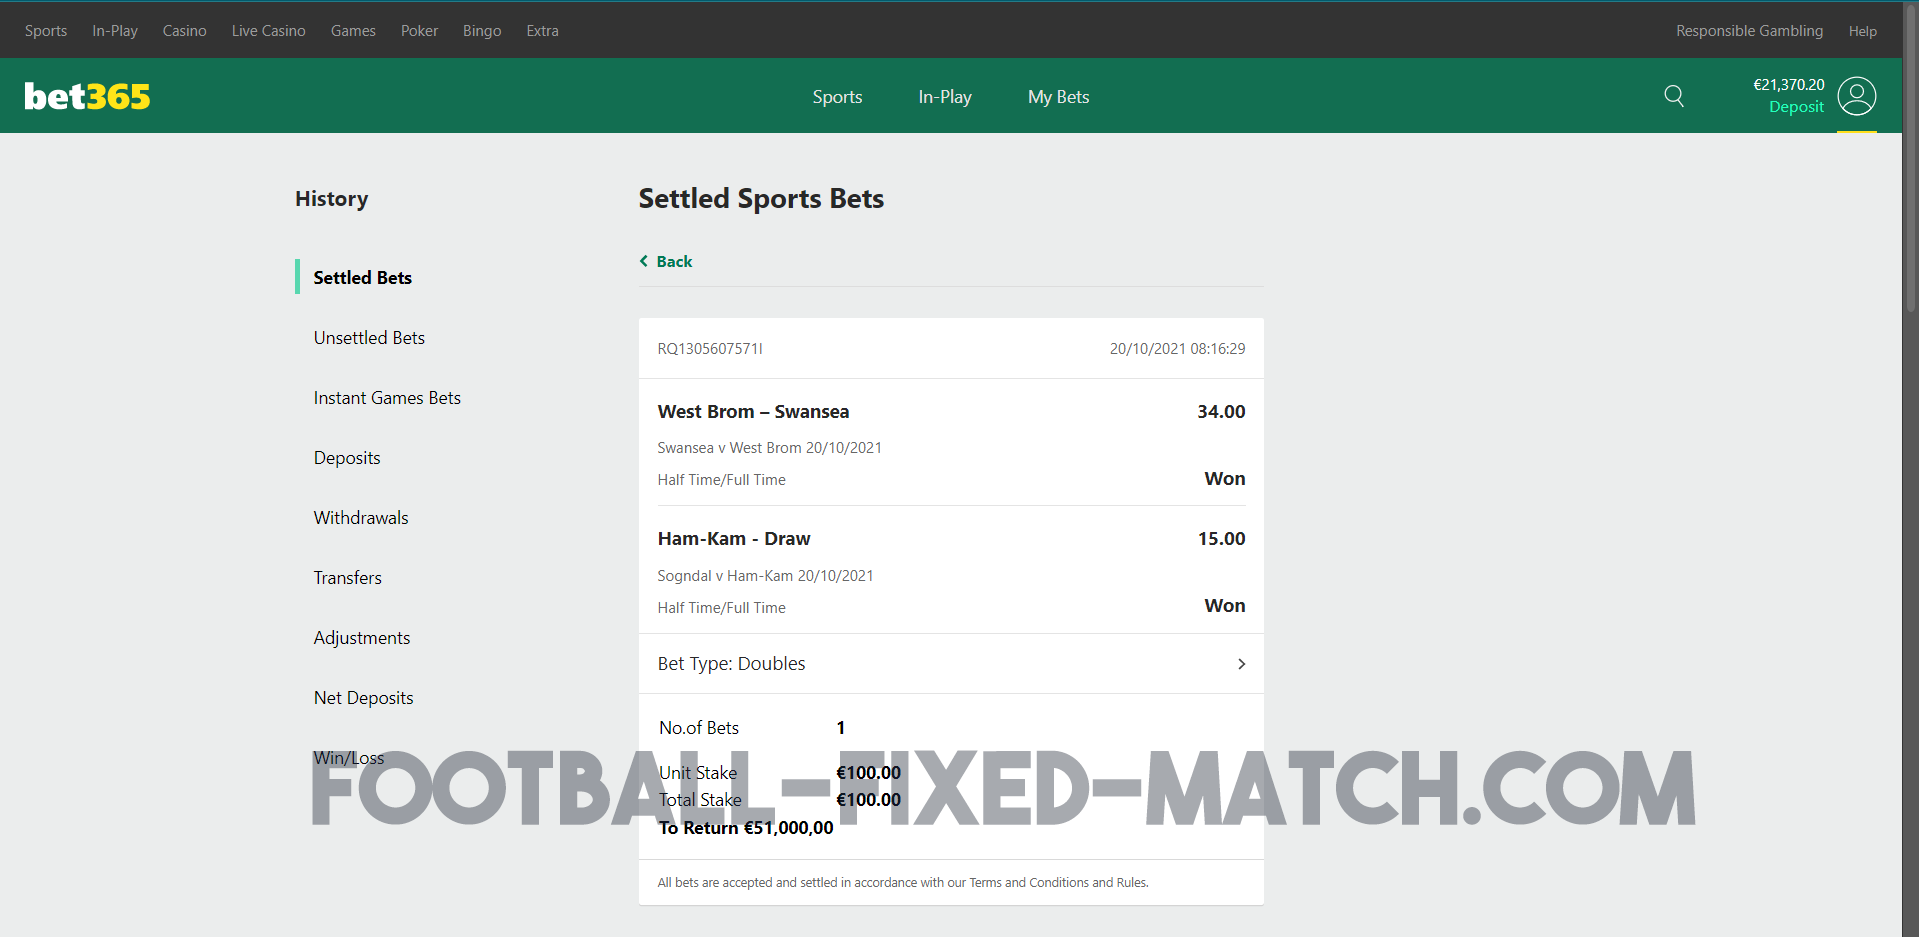 Today Fixed Matches